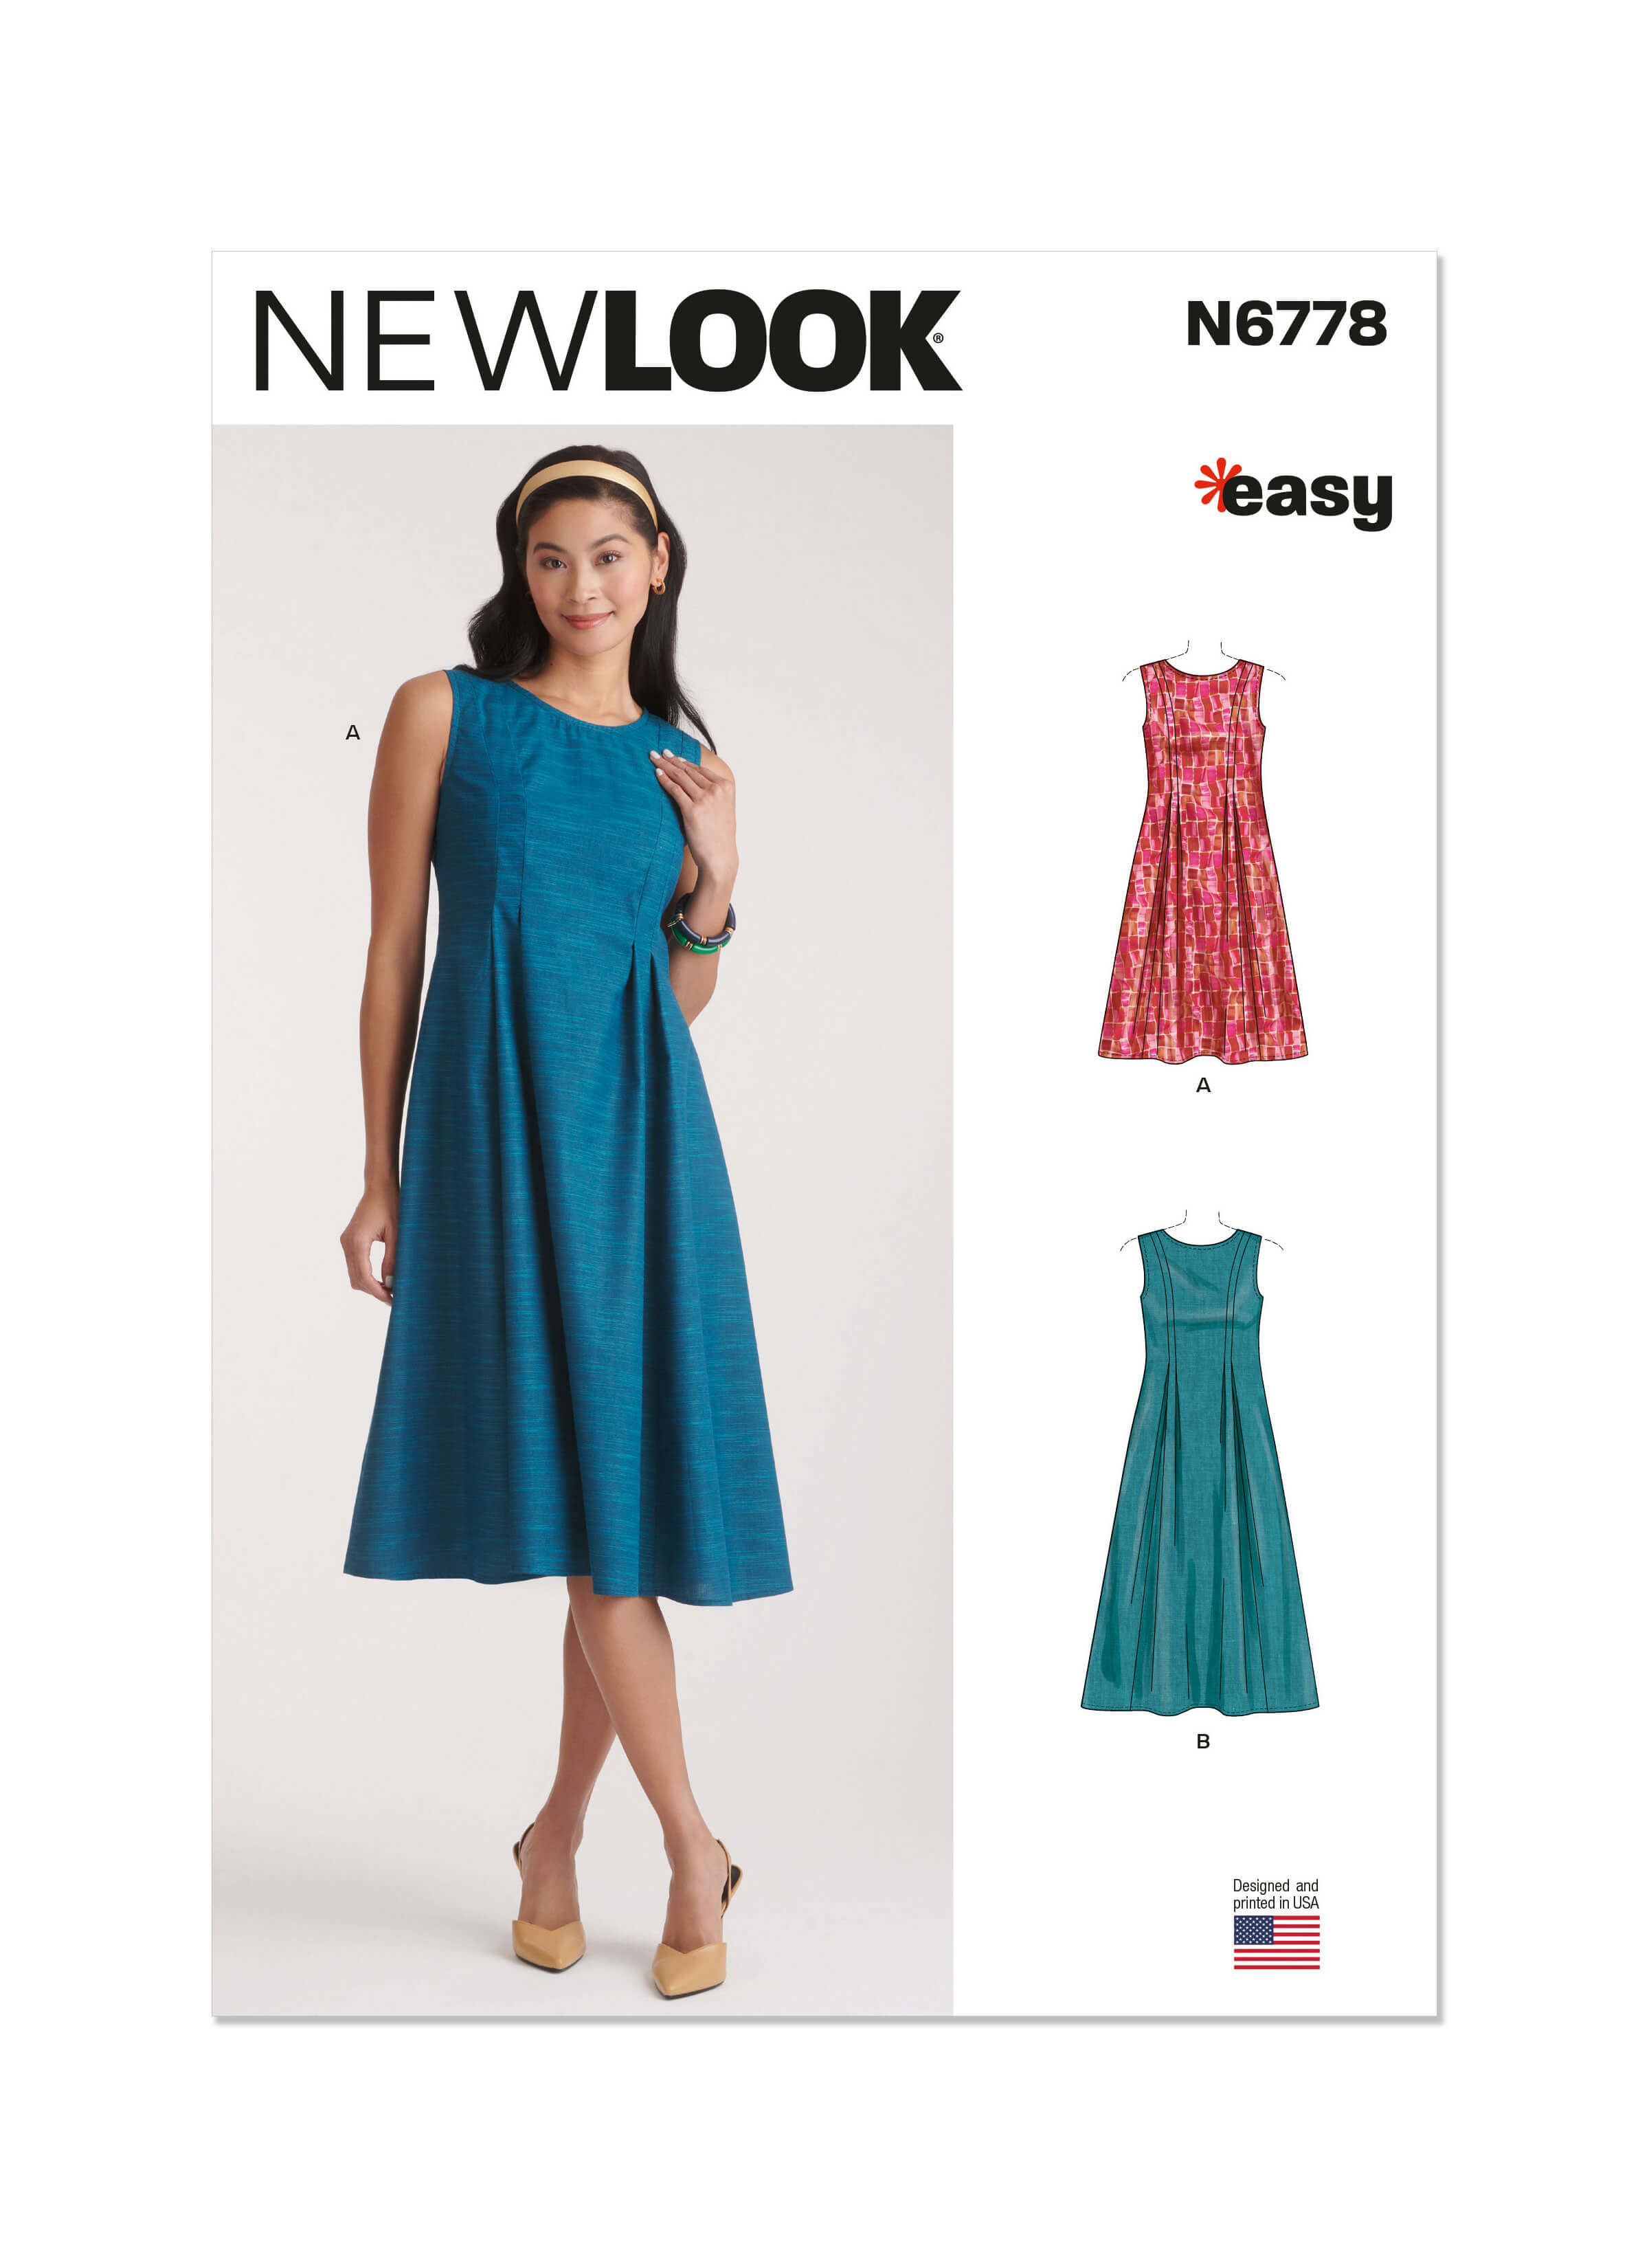 New Look Sewing Pattern N6778 Misses' Dress in Two Lengths